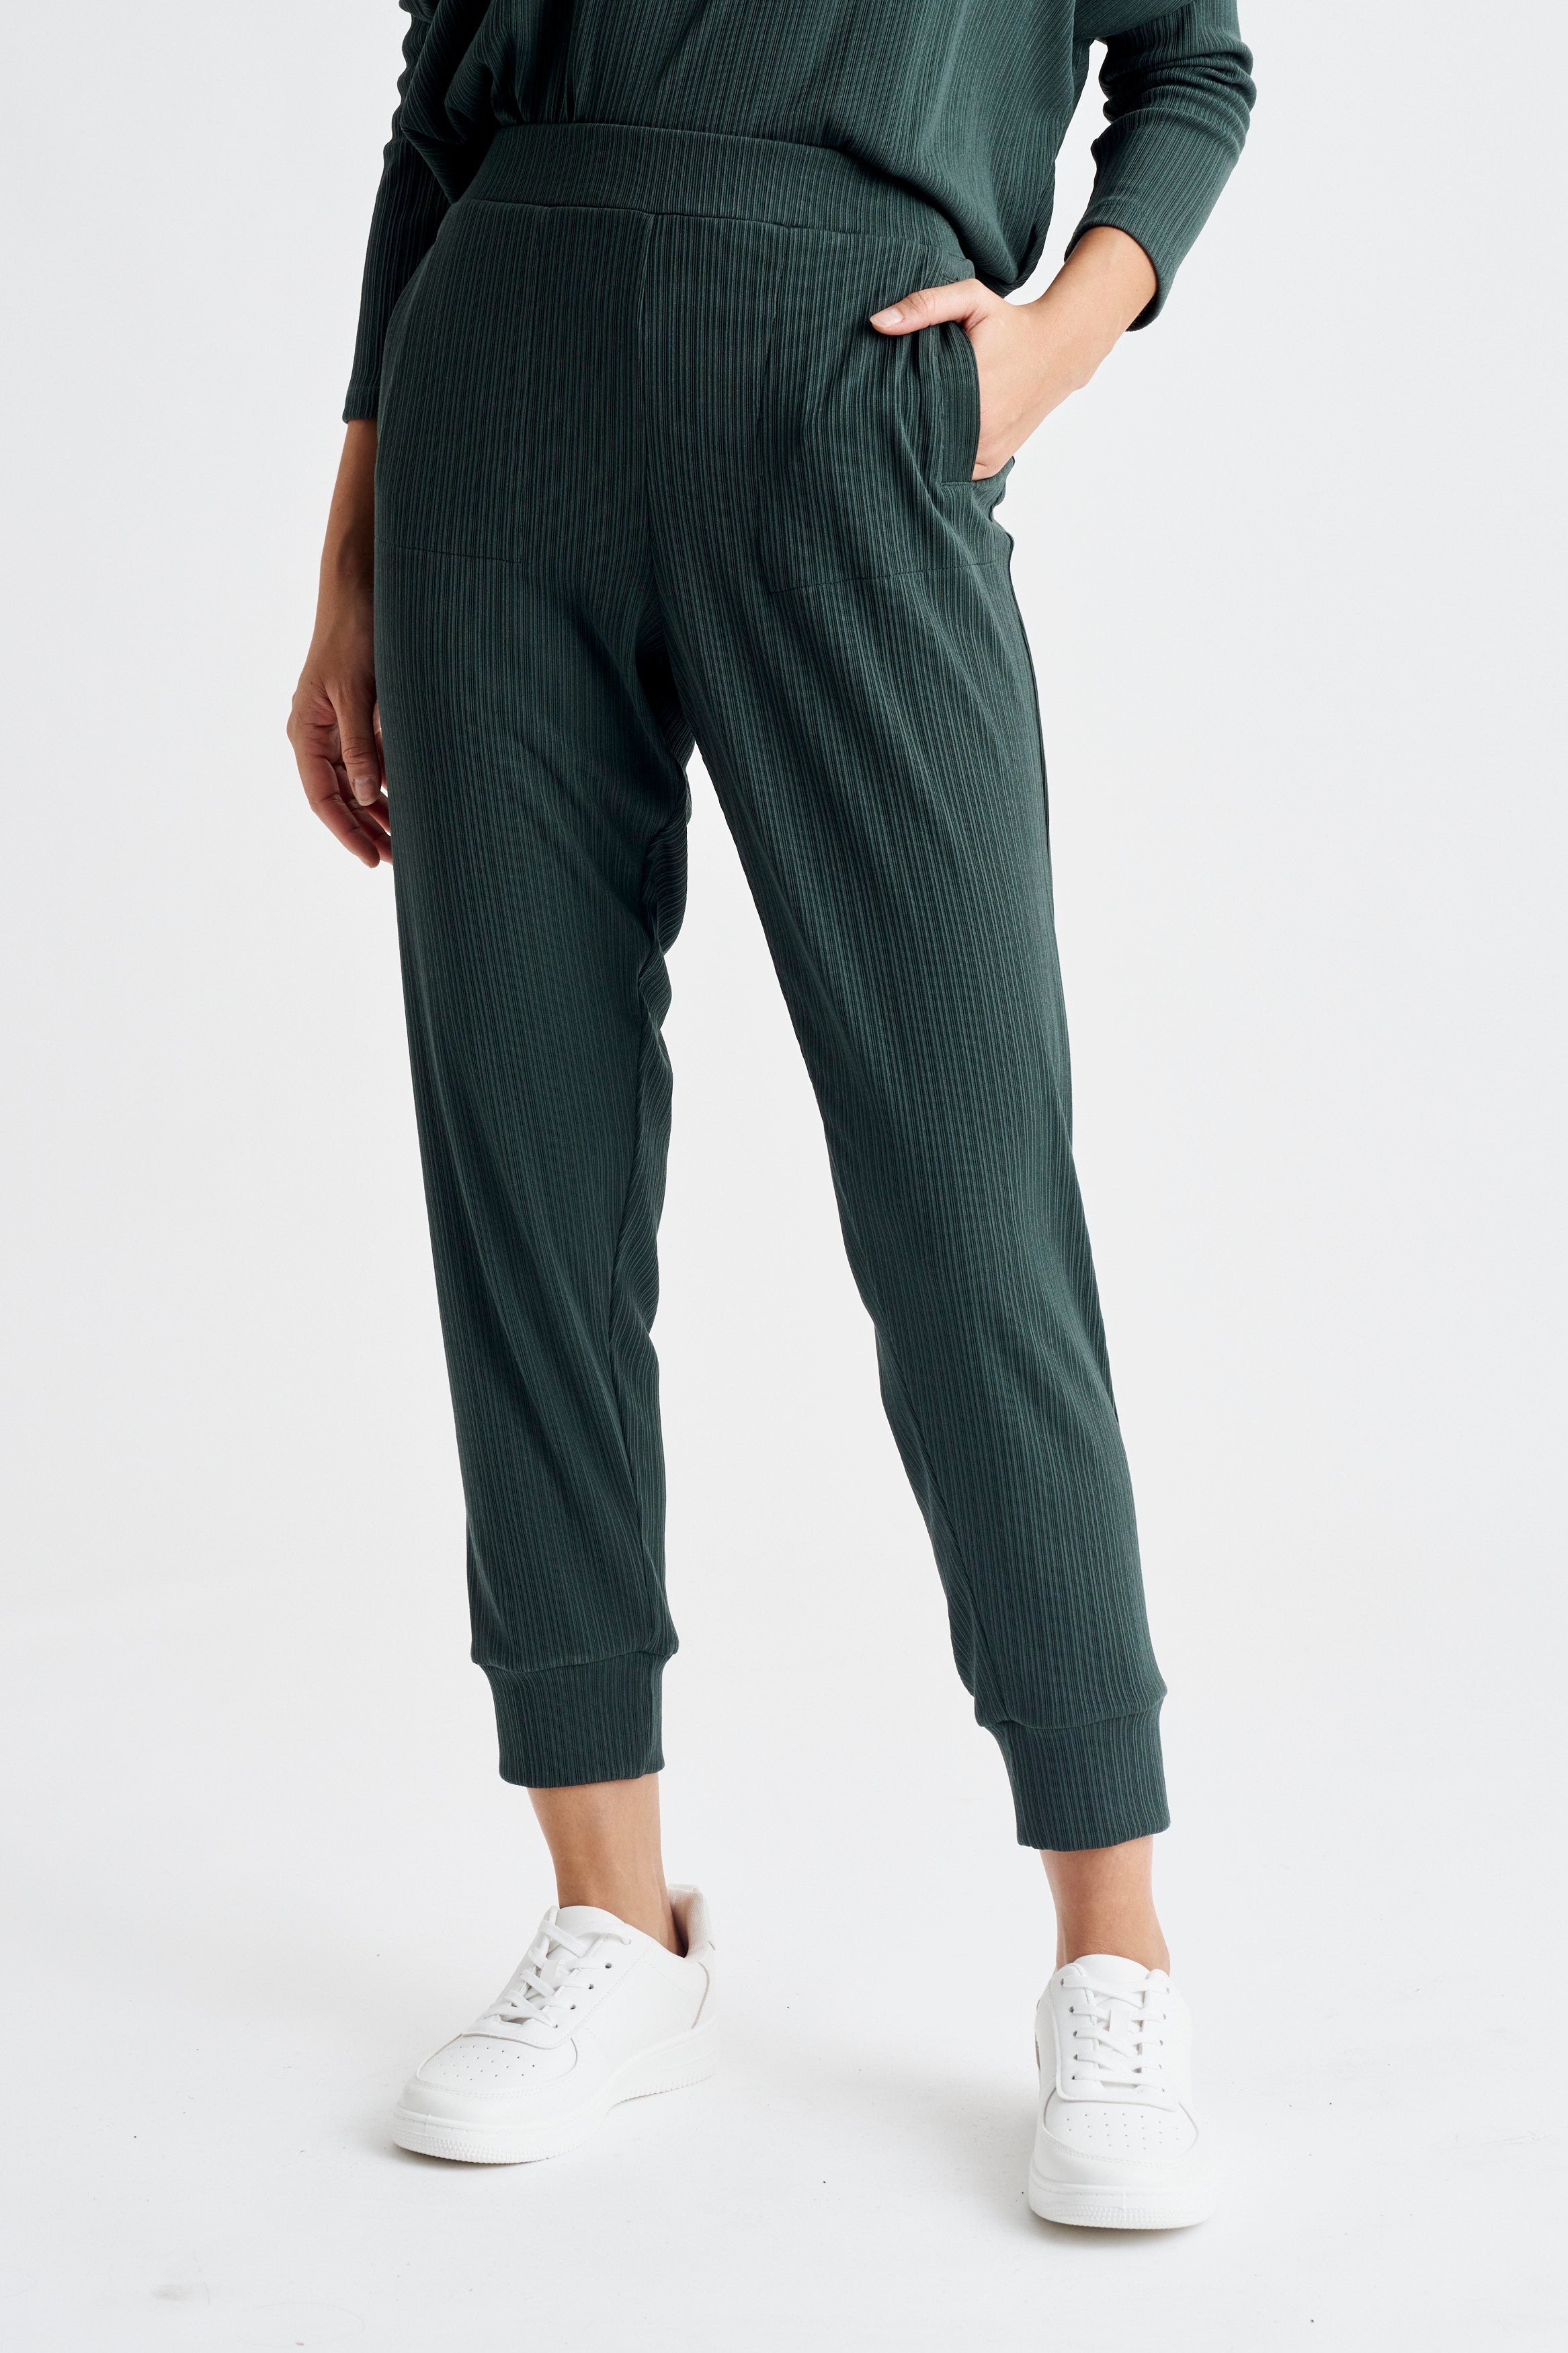 LUXE CARIBBEAN PANT